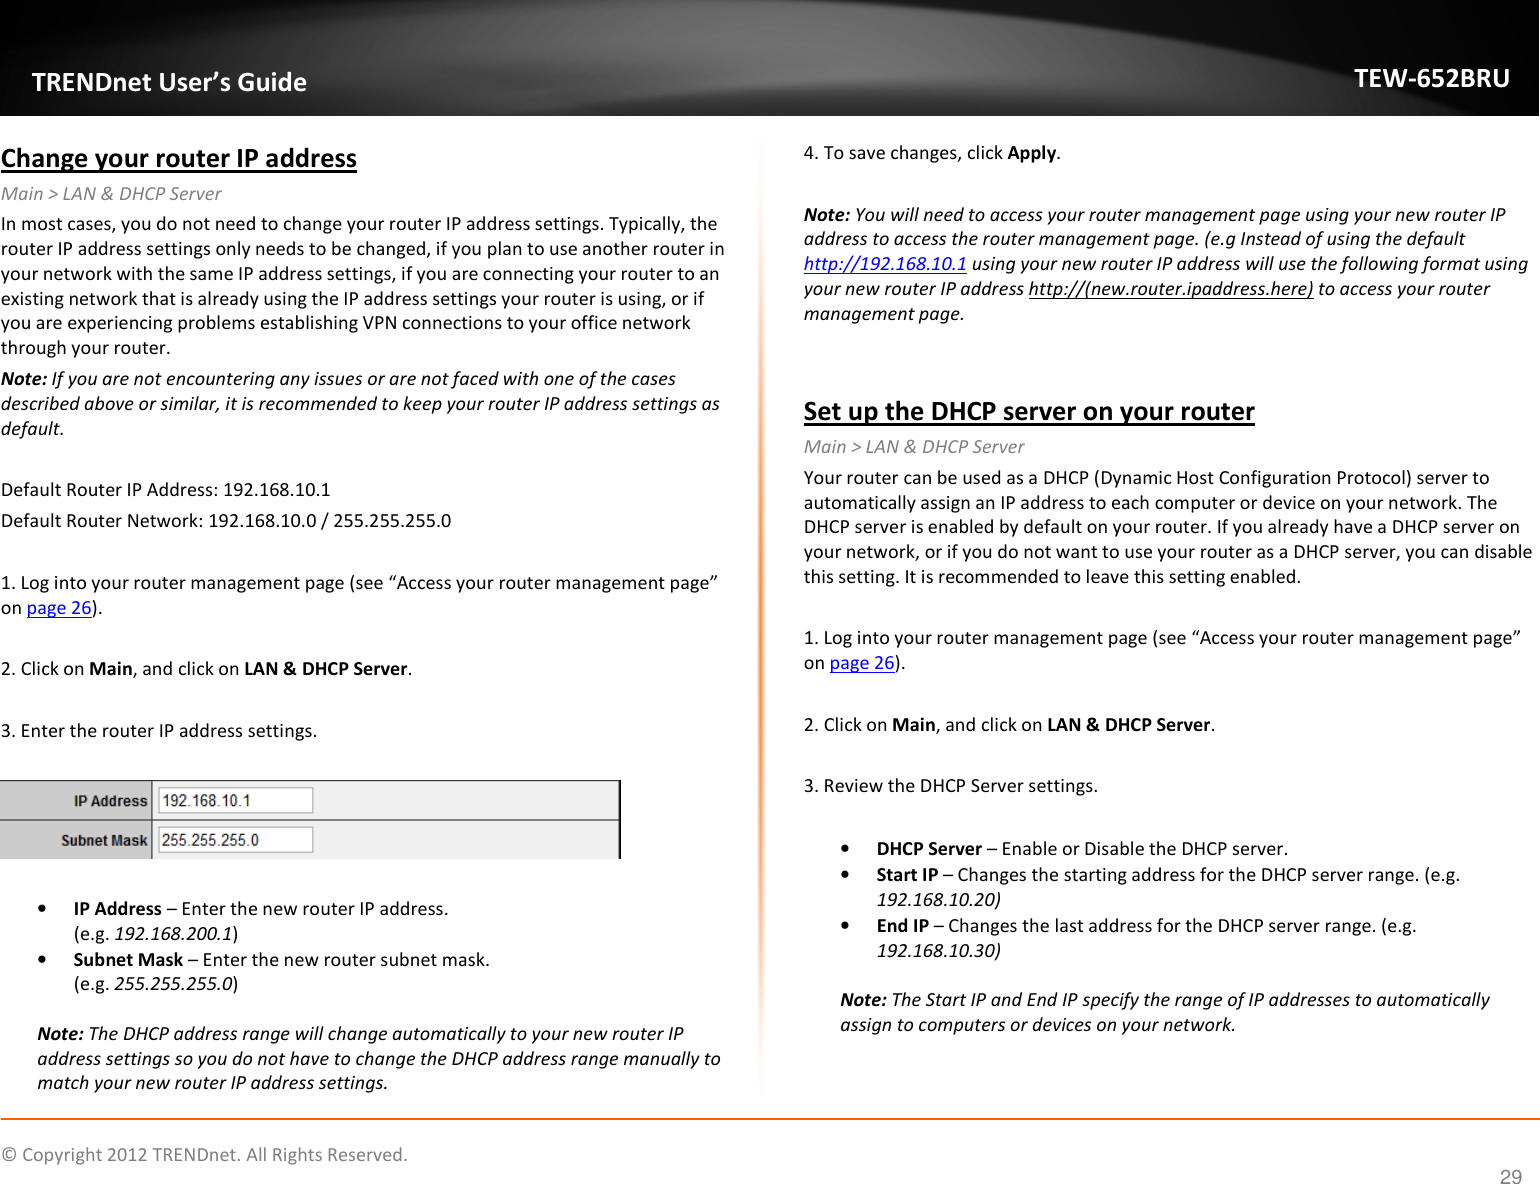              © Copyright 2012 TRENDnet. All Rights Reserved.       TRENDnet User’s Guide TEW-652BRU 29 Change your router IP address Main &gt; LAN &amp; DHCP Server In most cases, you do not need to change your router IP address settings. Typically, the router IP address settings only needs to be changed, if you plan to use another router in your network with the same IP address settings, if you are connecting your router to an existing network that is already using the IP address settings your router is using, or if you are experiencing problems establishing VPN connections to your office network through your router. Note: If you are not encountering any issues or are not faced with one of the cases described above or similar, it is recommended to keep your router IP address settings as default.  Default Router IP Address: 192.168.10.1  Default Router Network: 192.168.10.0 / 255.255.255.0  1. Log into your router management page (see “Access your router management page” on page 26).  2. Click on Main, and click on LAN &amp; DHCP Server.  3. Enter the router IP address settings.    • IP Address – Enter the new router IP address.  (e.g. 192.168.200.1) • Subnet Mask – Enter the new router subnet mask. (e.g. 255.255.255.0)  Note: The DHCP address range will change automatically to your new router IP address settings so you do not have to change the DHCP address range manually to match your new router IP address settings.  4. To save changes, click Apply.  Note: You will need to access your router management page using your new router IP address to access the router management page. (e.g Instead of using the default http://192.168.10.1 using your new router IP address will use the following format using your new router IP address http://(new.router.ipaddress.here) to access your router management page.   Set up the DHCP server on your router Main &gt; LAN &amp; DHCP Server Your router can be used as a DHCP (Dynamic Host Configuration Protocol) server to automatically assign an IP address to each computer or device on your network. The DHCP server is enabled by default on your router. If you already have a DHCP server on your network, or if you do not want to use your router as a DHCP server, you can disable this setting. It is recommended to leave this setting enabled.  1. Log into your router management page (see “Access your router management page” on page 26).  2. Click on Main, and click on LAN &amp; DHCP Server.  3. Review the DHCP Server settings.  • DHCP Server – Enable or Disable the DHCP server. • Start IP – Changes the starting address for the DHCP server range. (e.g. 192.168.10.20) • End IP – Changes the last address for the DHCP server range. (e.g. 192.168.10.30)  Note: The Start IP and End IP specify the range of IP addresses to automatically assign to computers or devices on your network.   